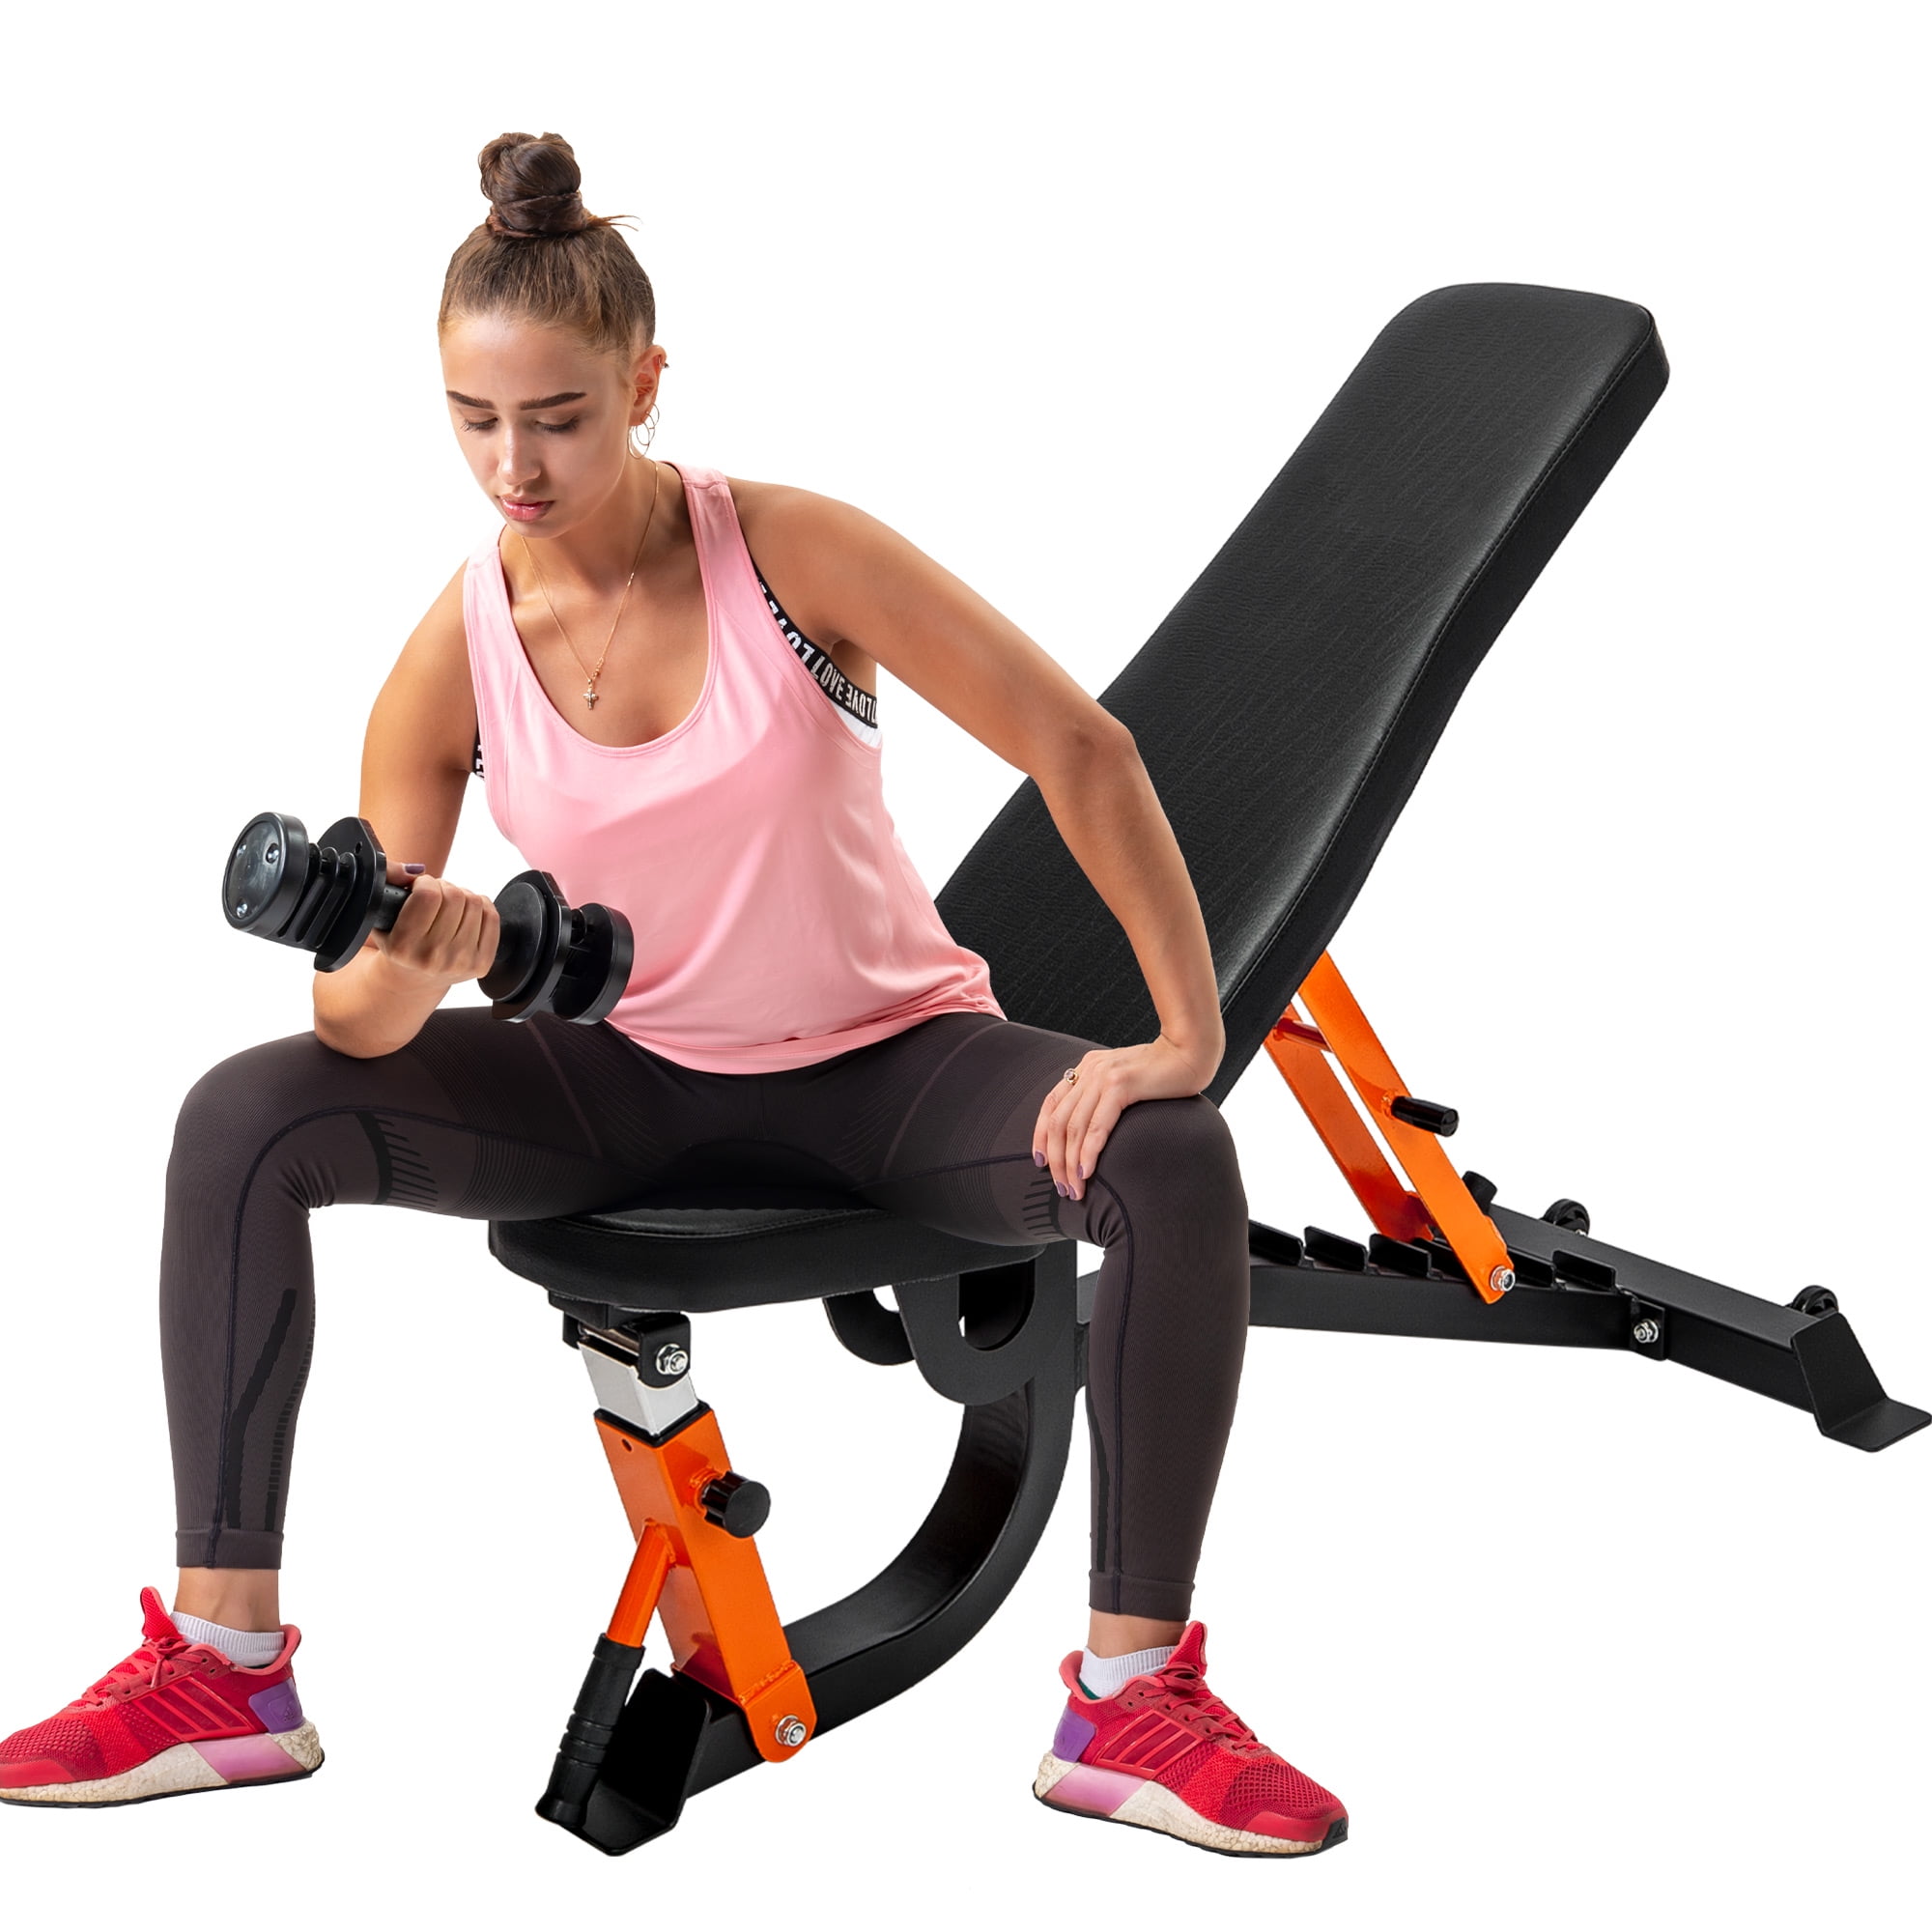 Weight Training Bench for Dumbbell Training. SHAP Adjustable Weight Bench Adjustable Strength Training Bench with Leg Extension for Home Gym 